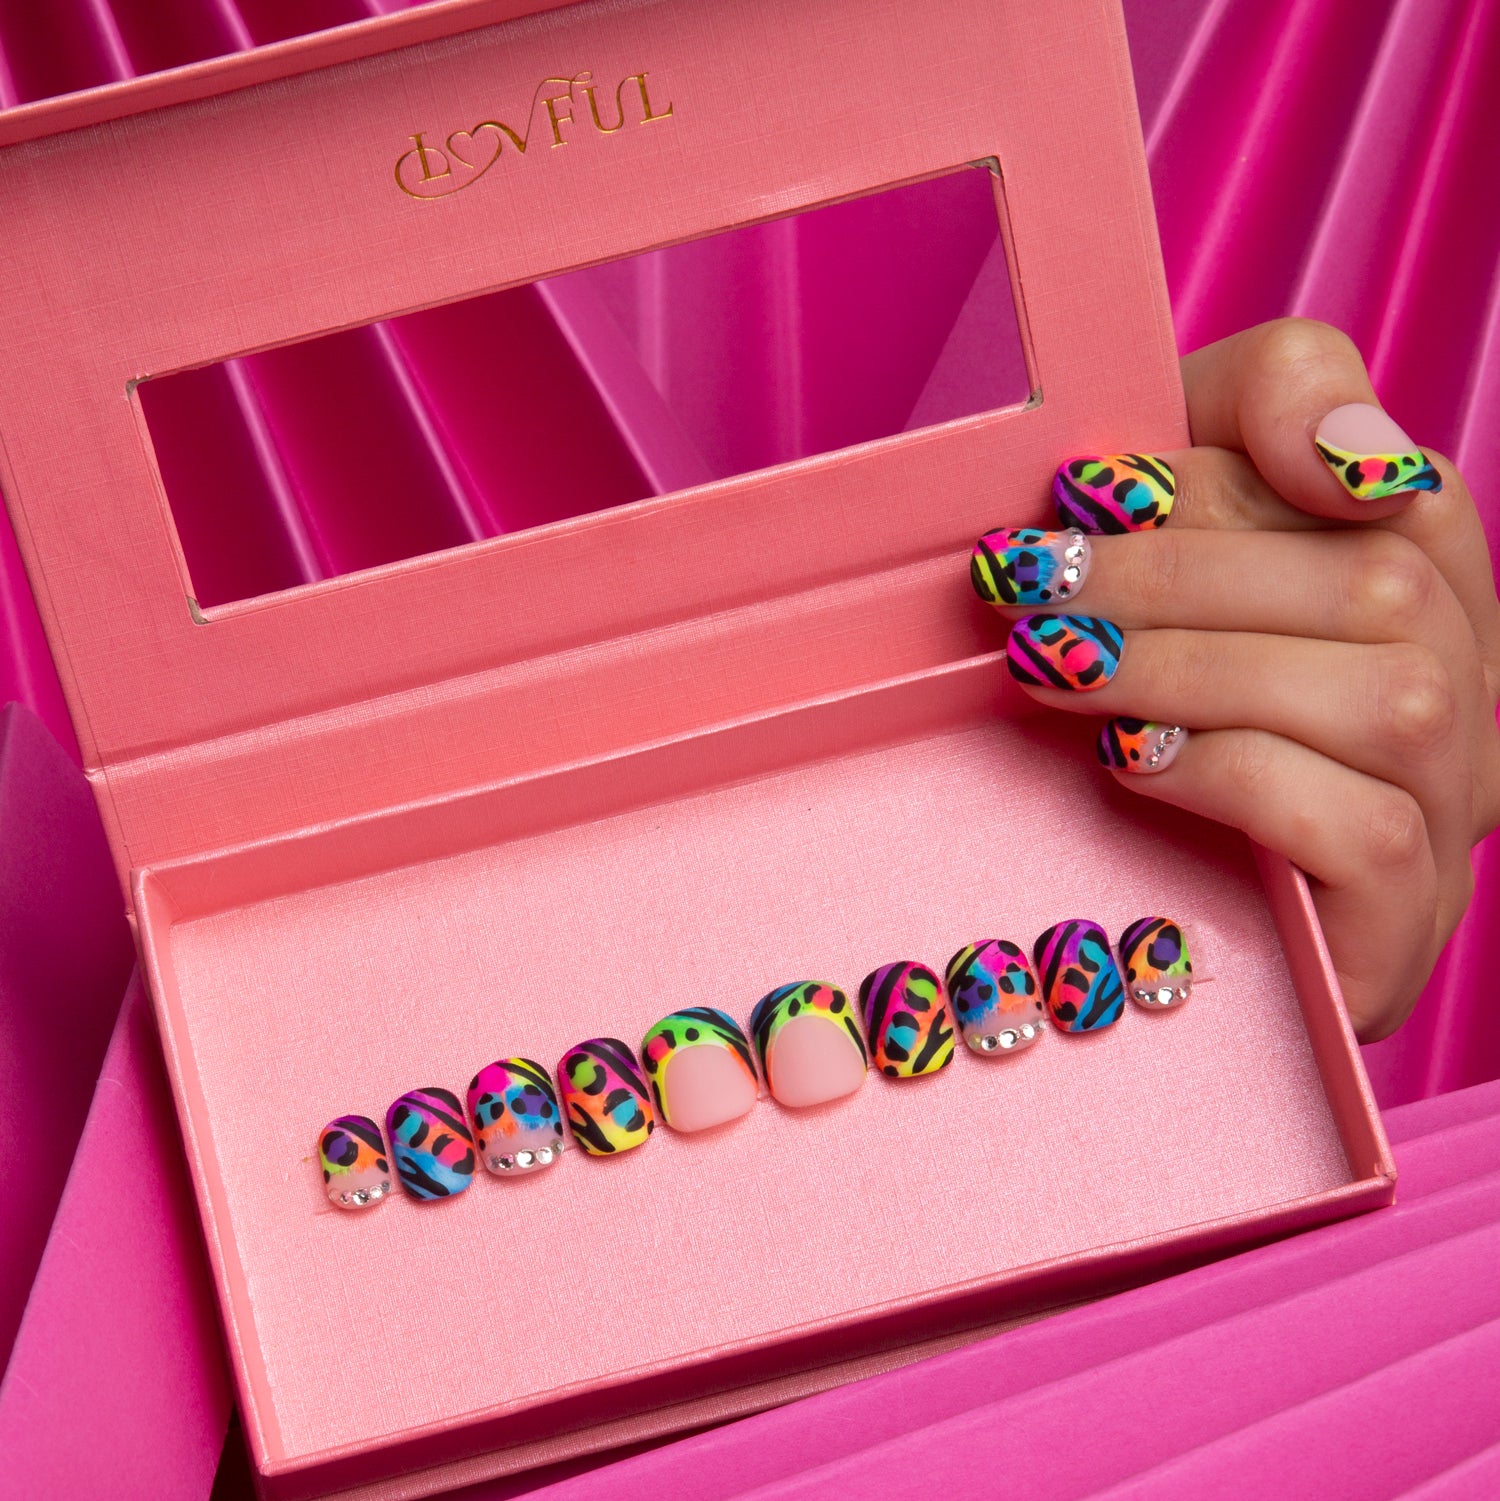 Hand holding a pink box displaying square-shaped press-on nails with colorful bright French tips and striking leopard prints from Lovful's H123 collection.